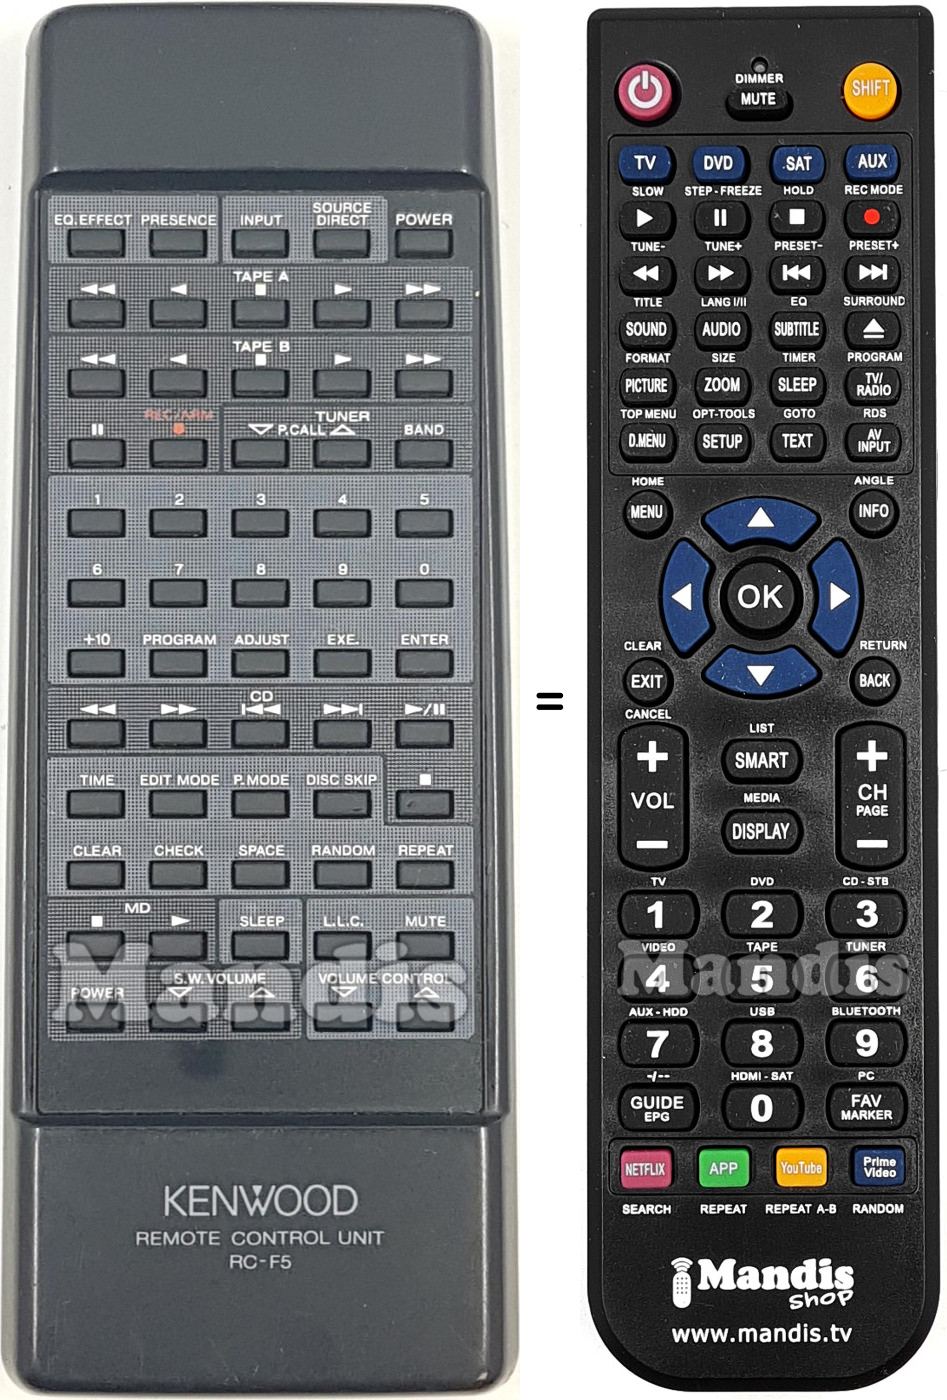 Replacement remote control Kenwood RCF5